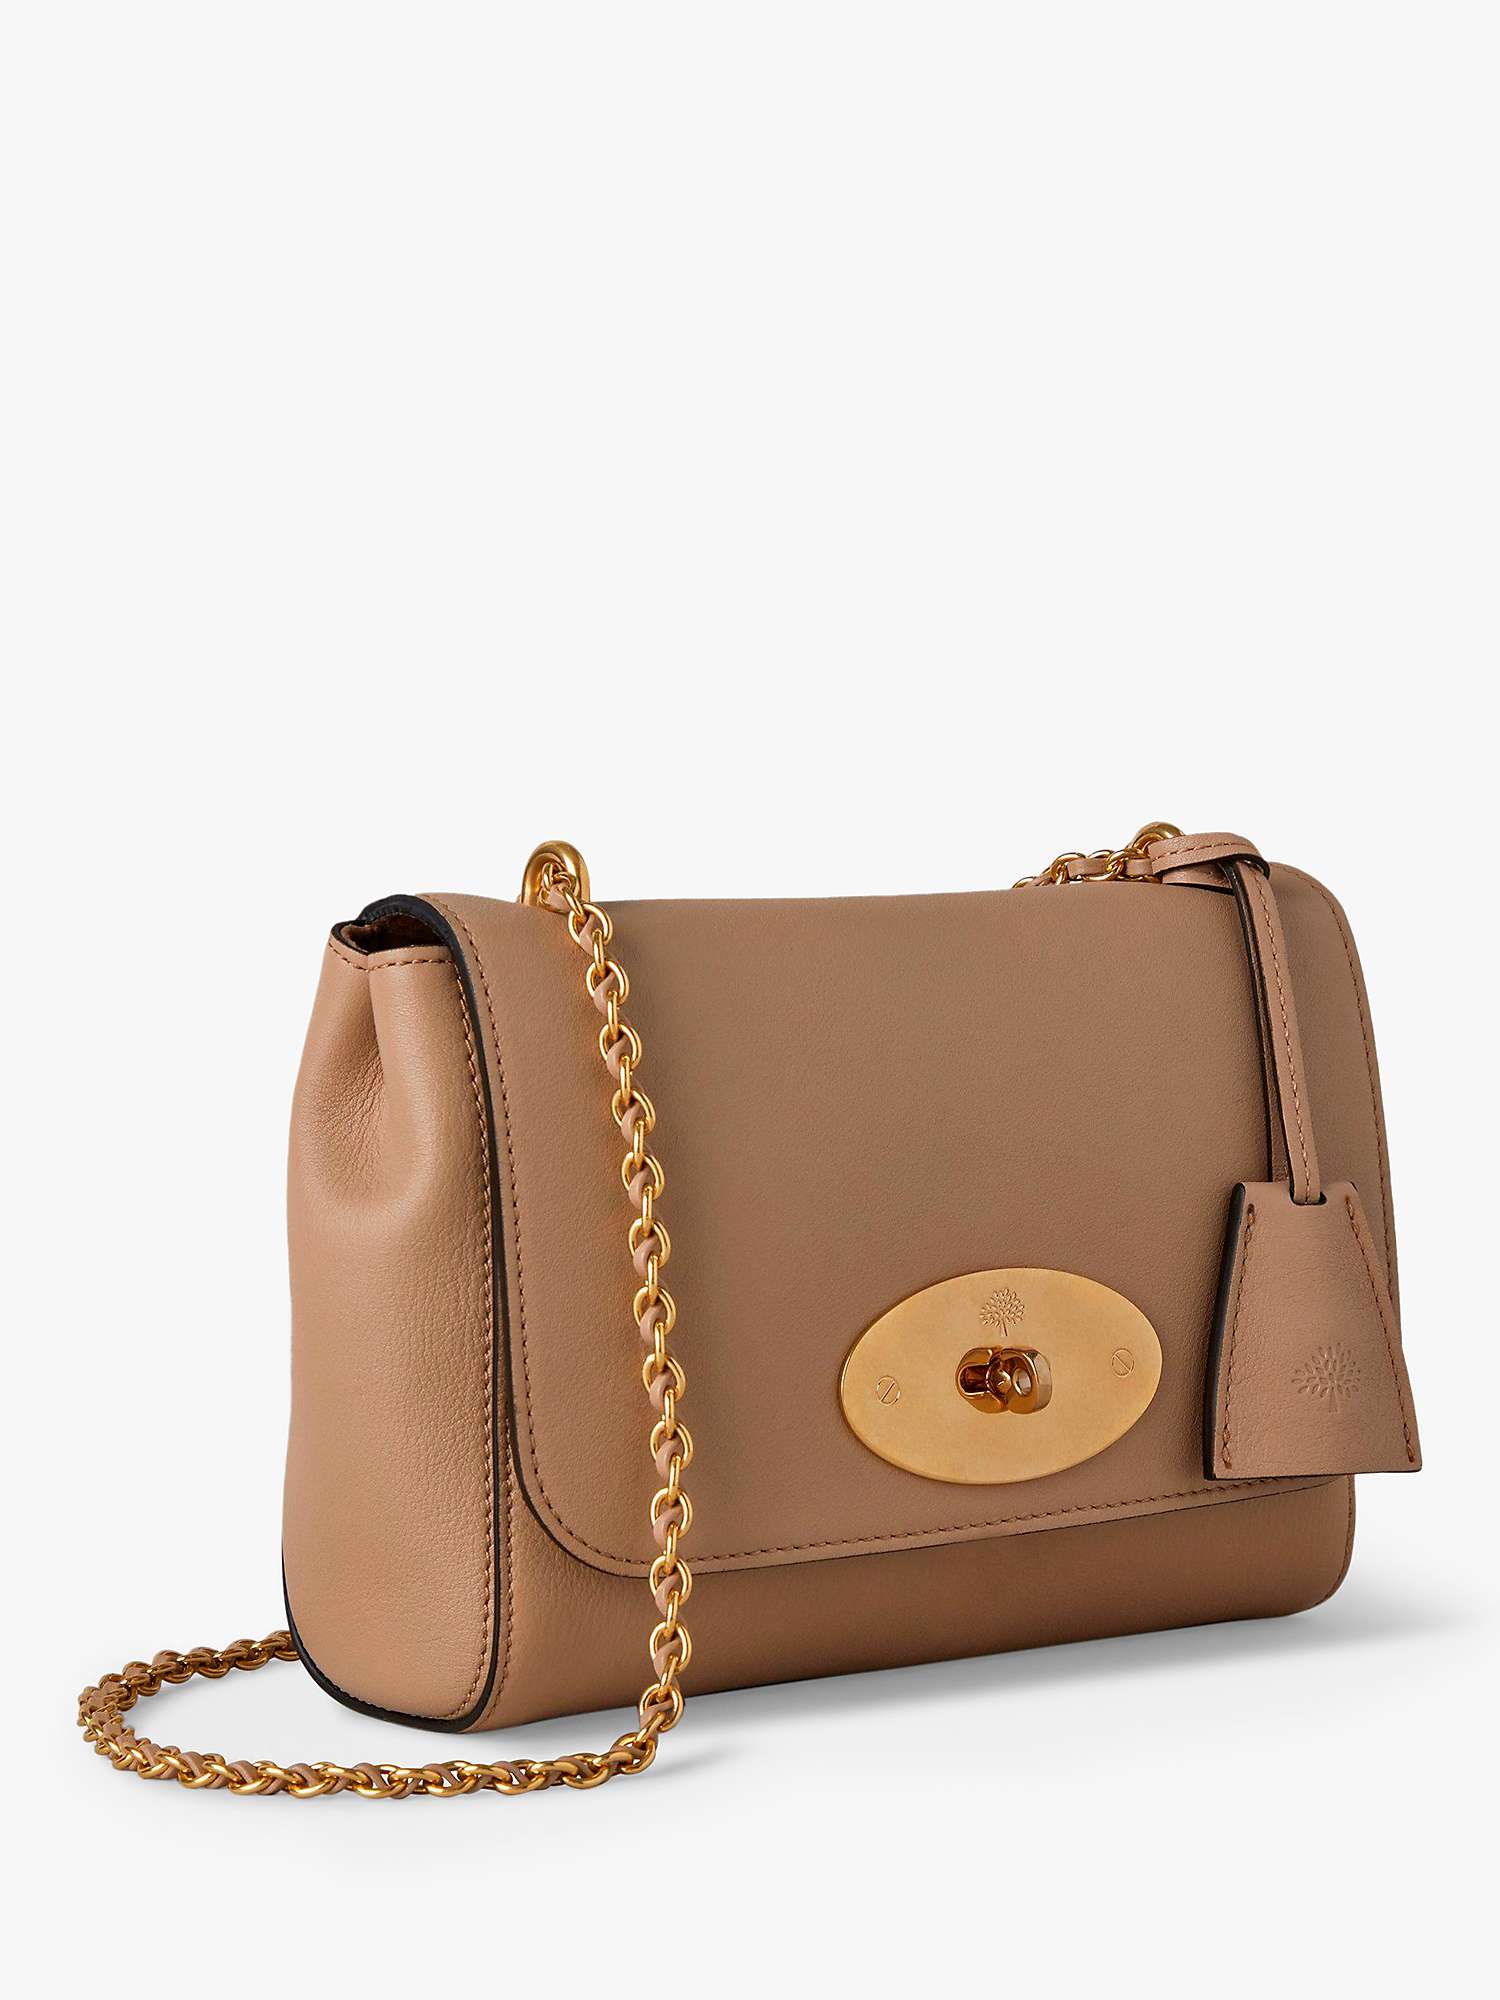 Buy Mulberry Lily Silky Calf Leather Shoulder Bag, Maple Online at johnlewis.com